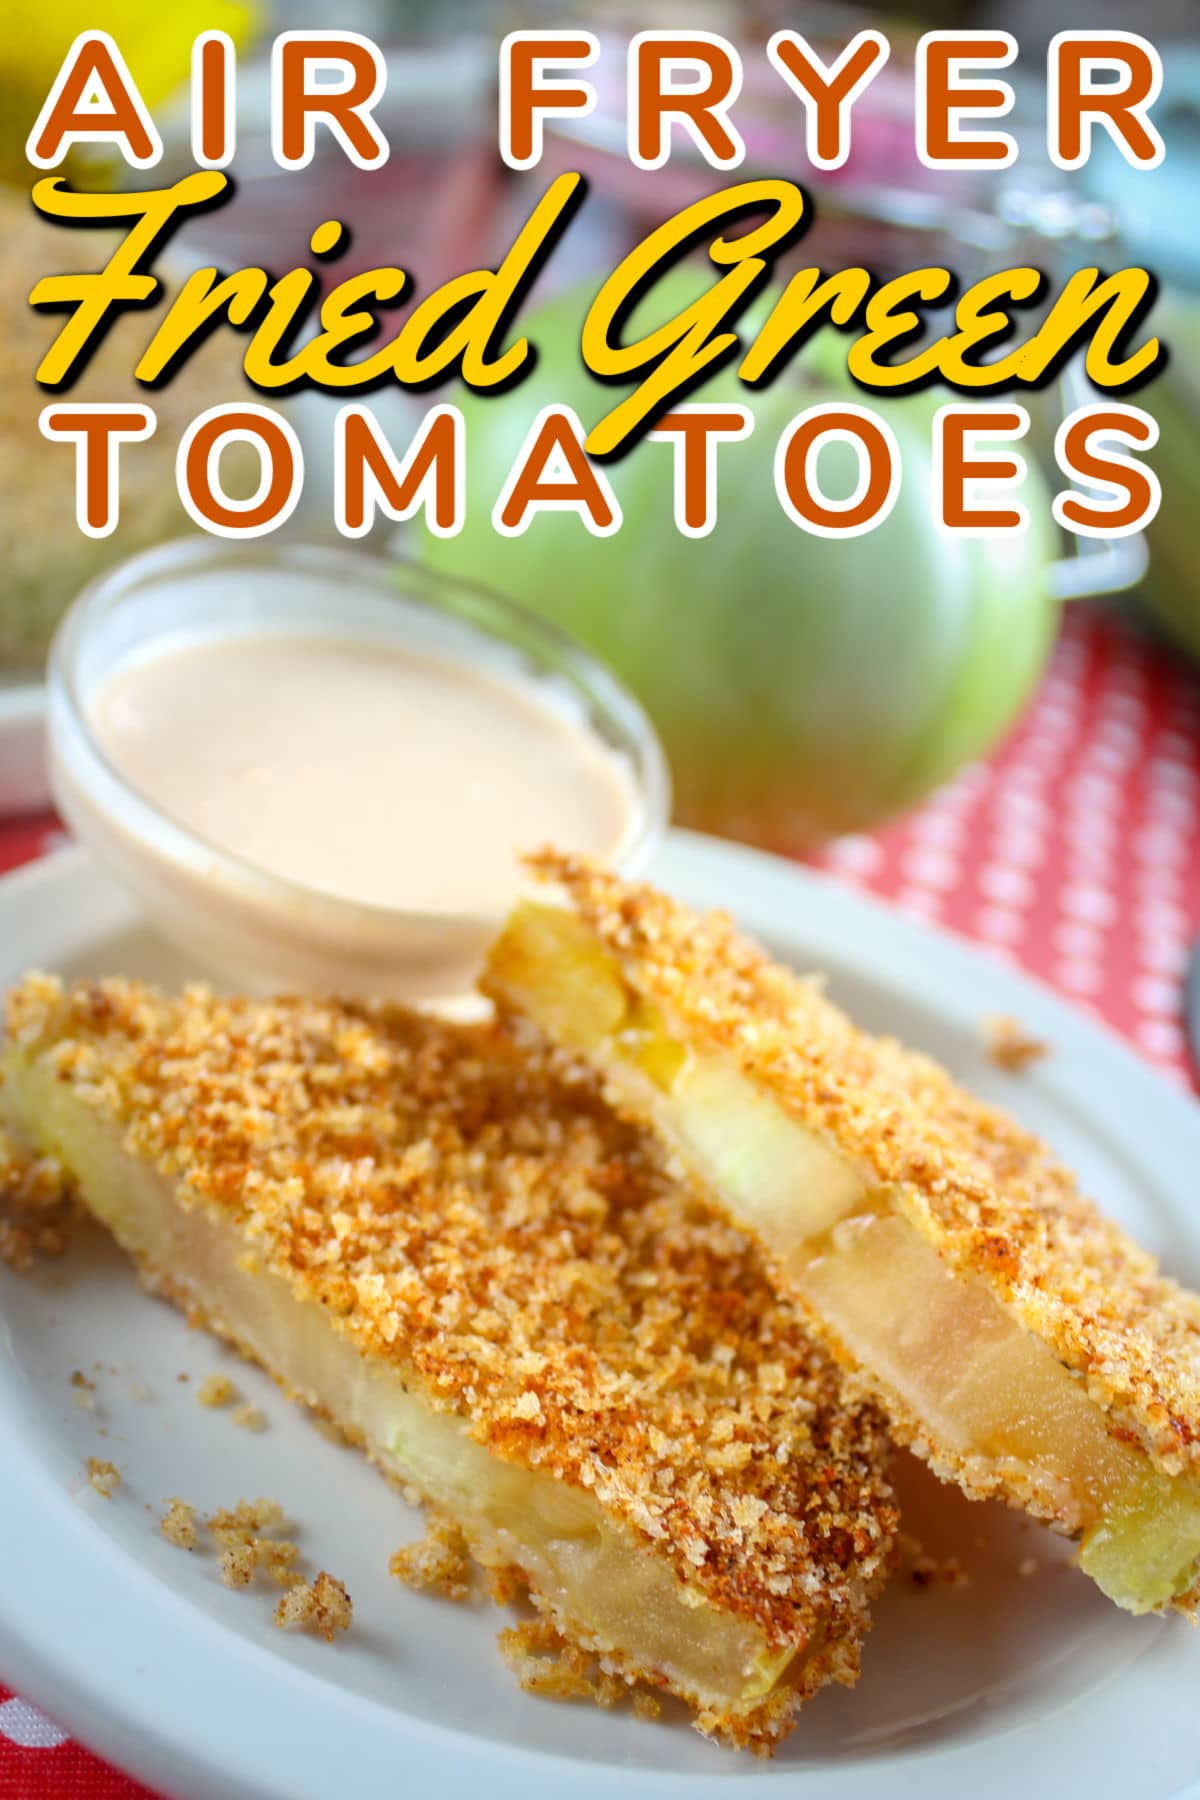 Fried Green Tomatoes are a staple in the south and I always make sure to snag some when I head to Alabama to visit my friends. I saw some beautiful green tomatoes at the farmers market and decided to make them at home - of course in my air fryer!  via @foodhussy